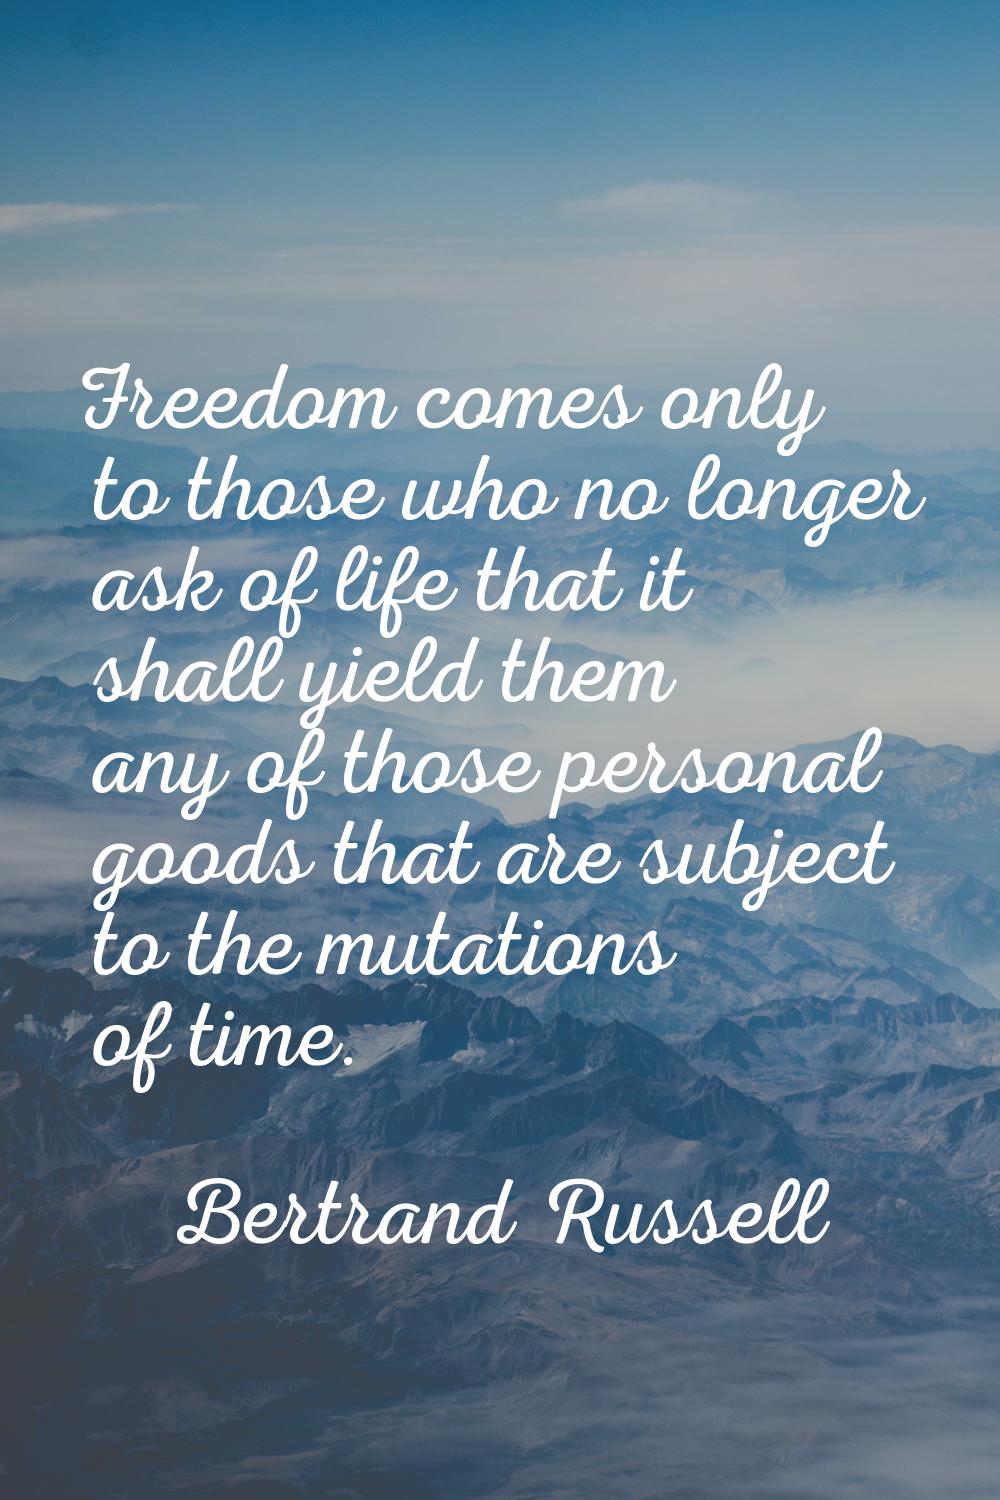 Freedom comes only to those who no longer ask of life that it shall yield them any of those persona